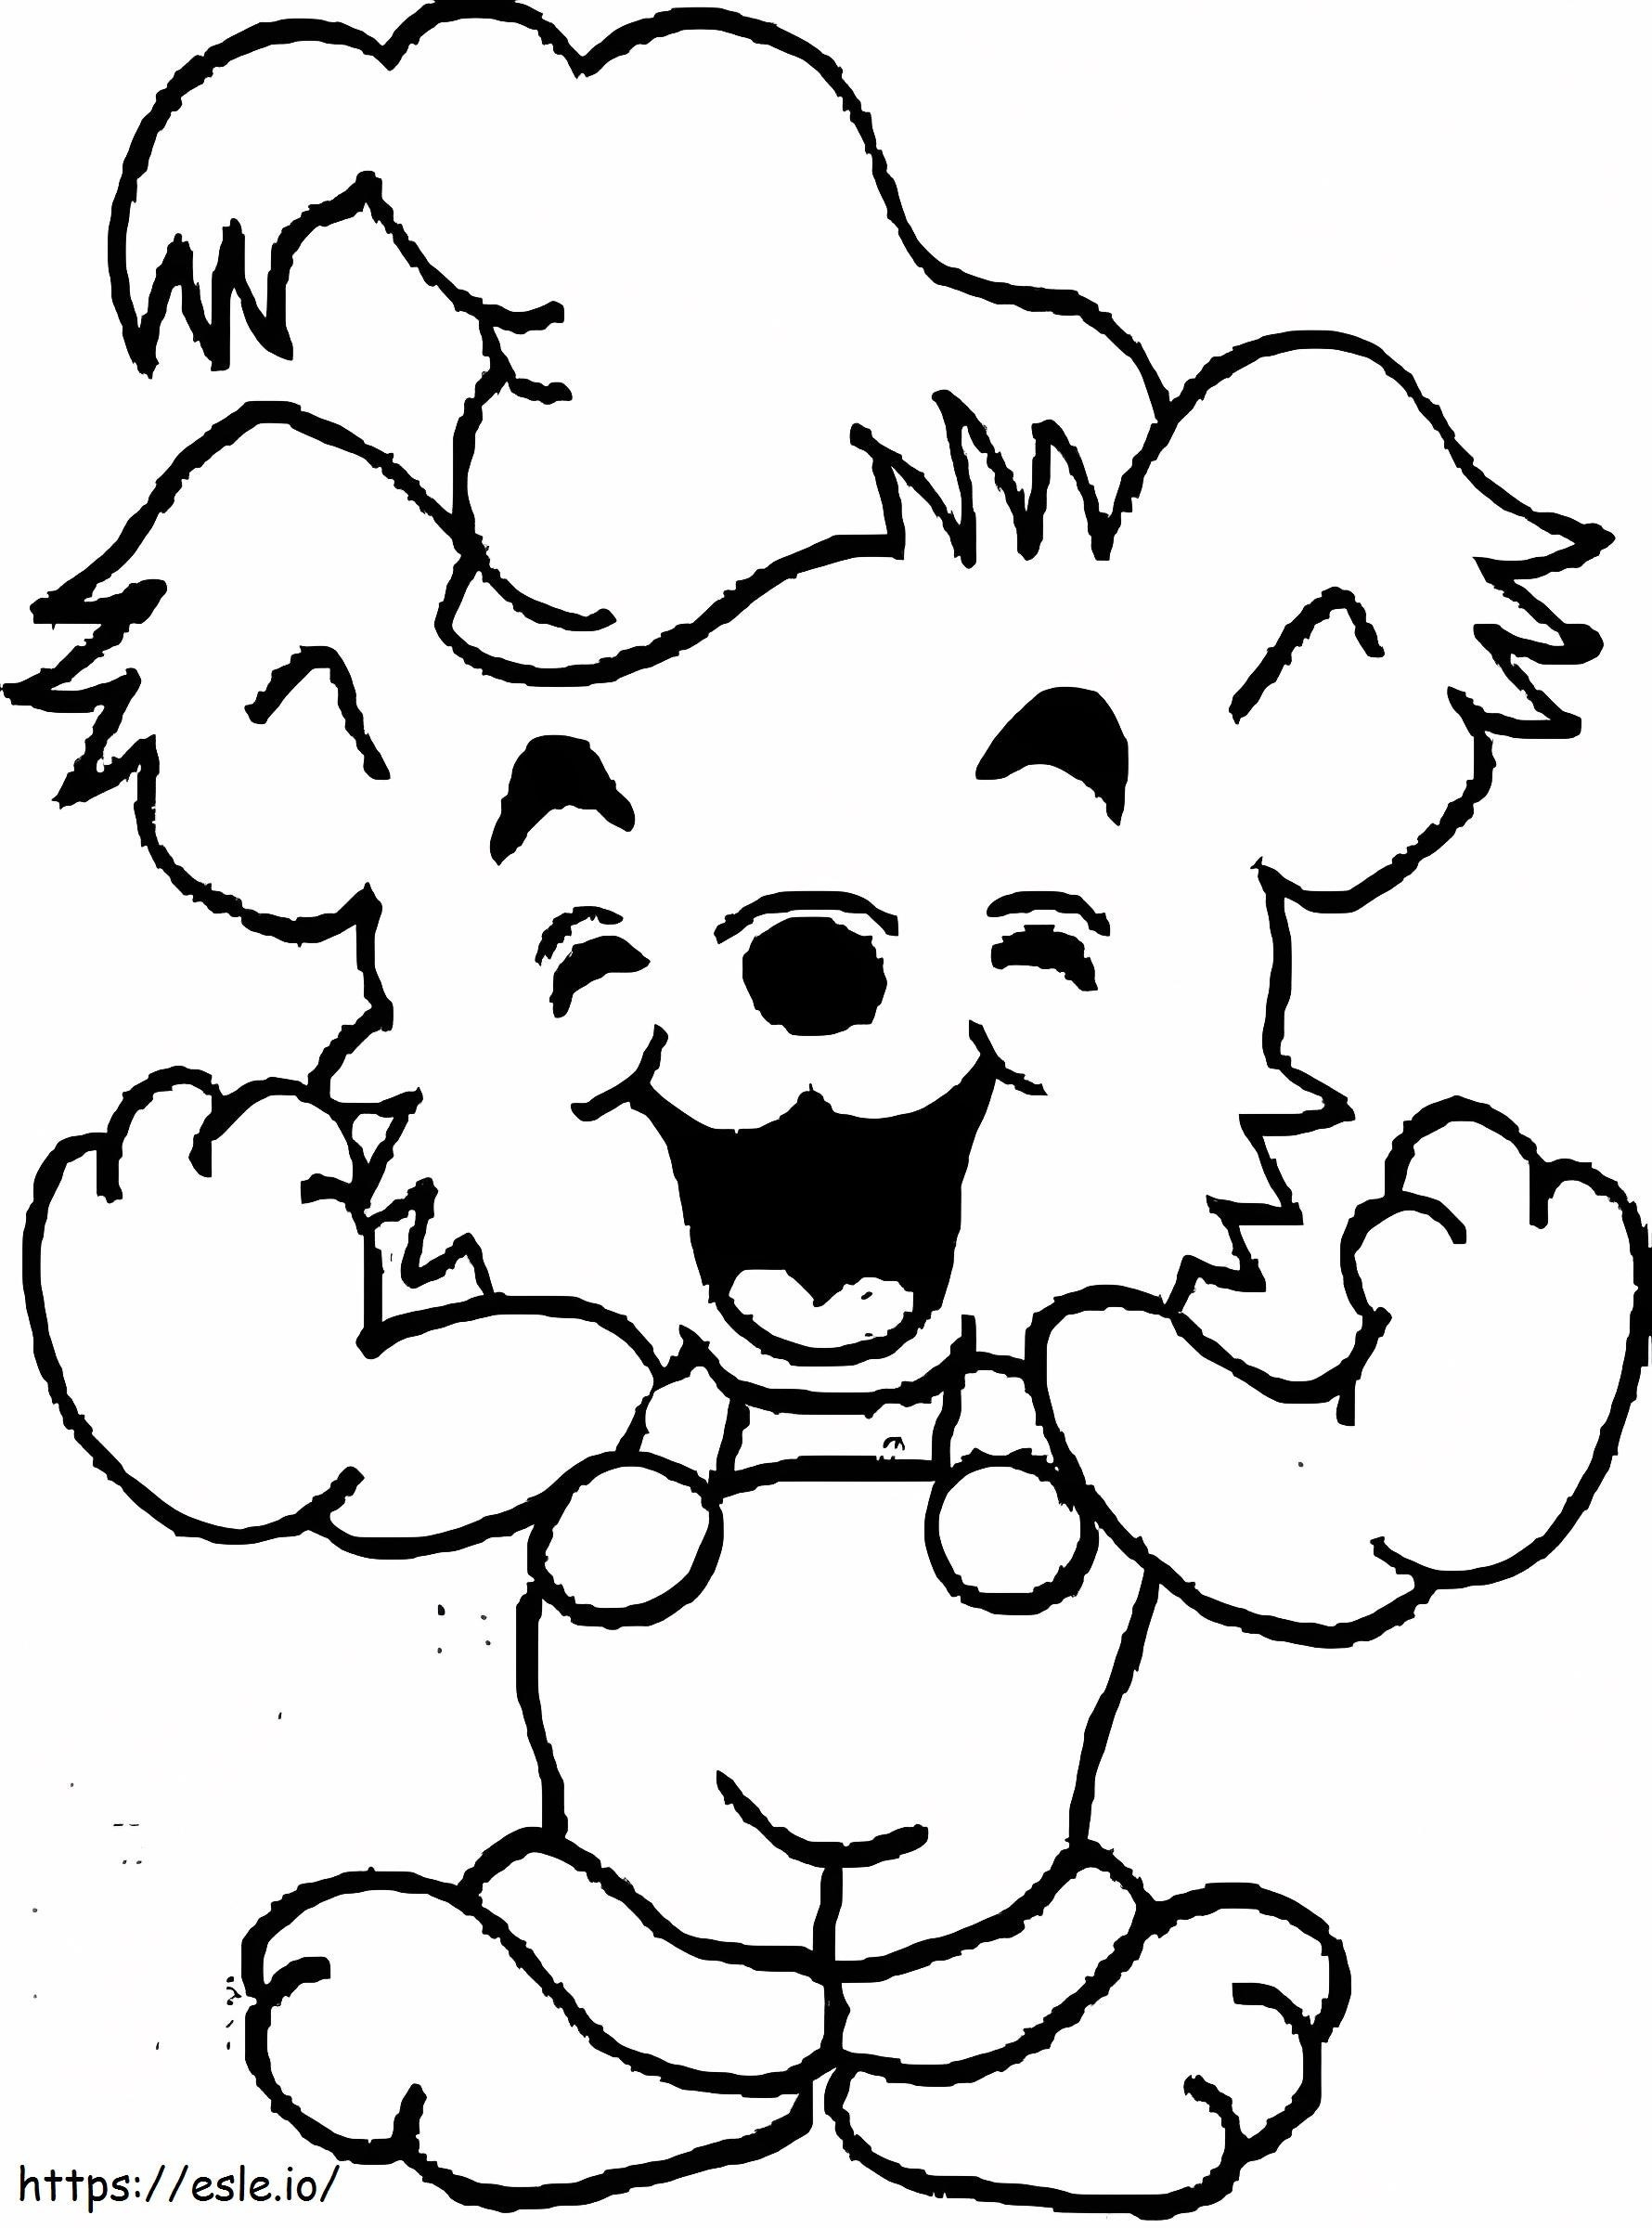 Free Teddy Bear coloring page